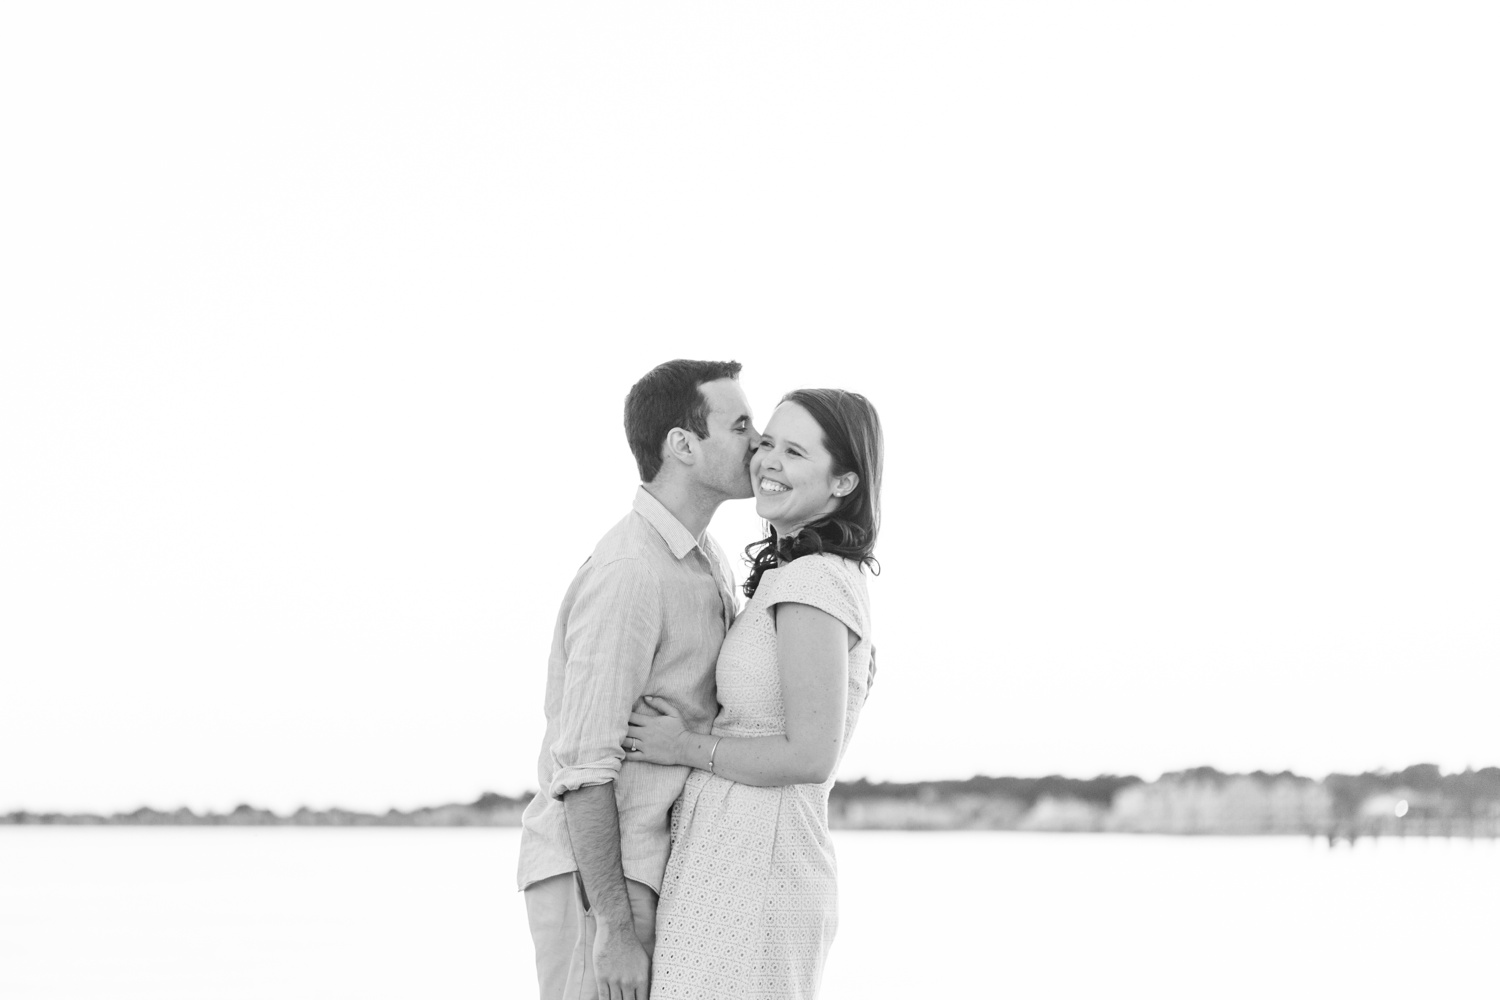 walnut-beach-engagement-session-milford-connecticut-top-ct-nyc-destination-wedding-photographer-shaina-lee-photography-photo